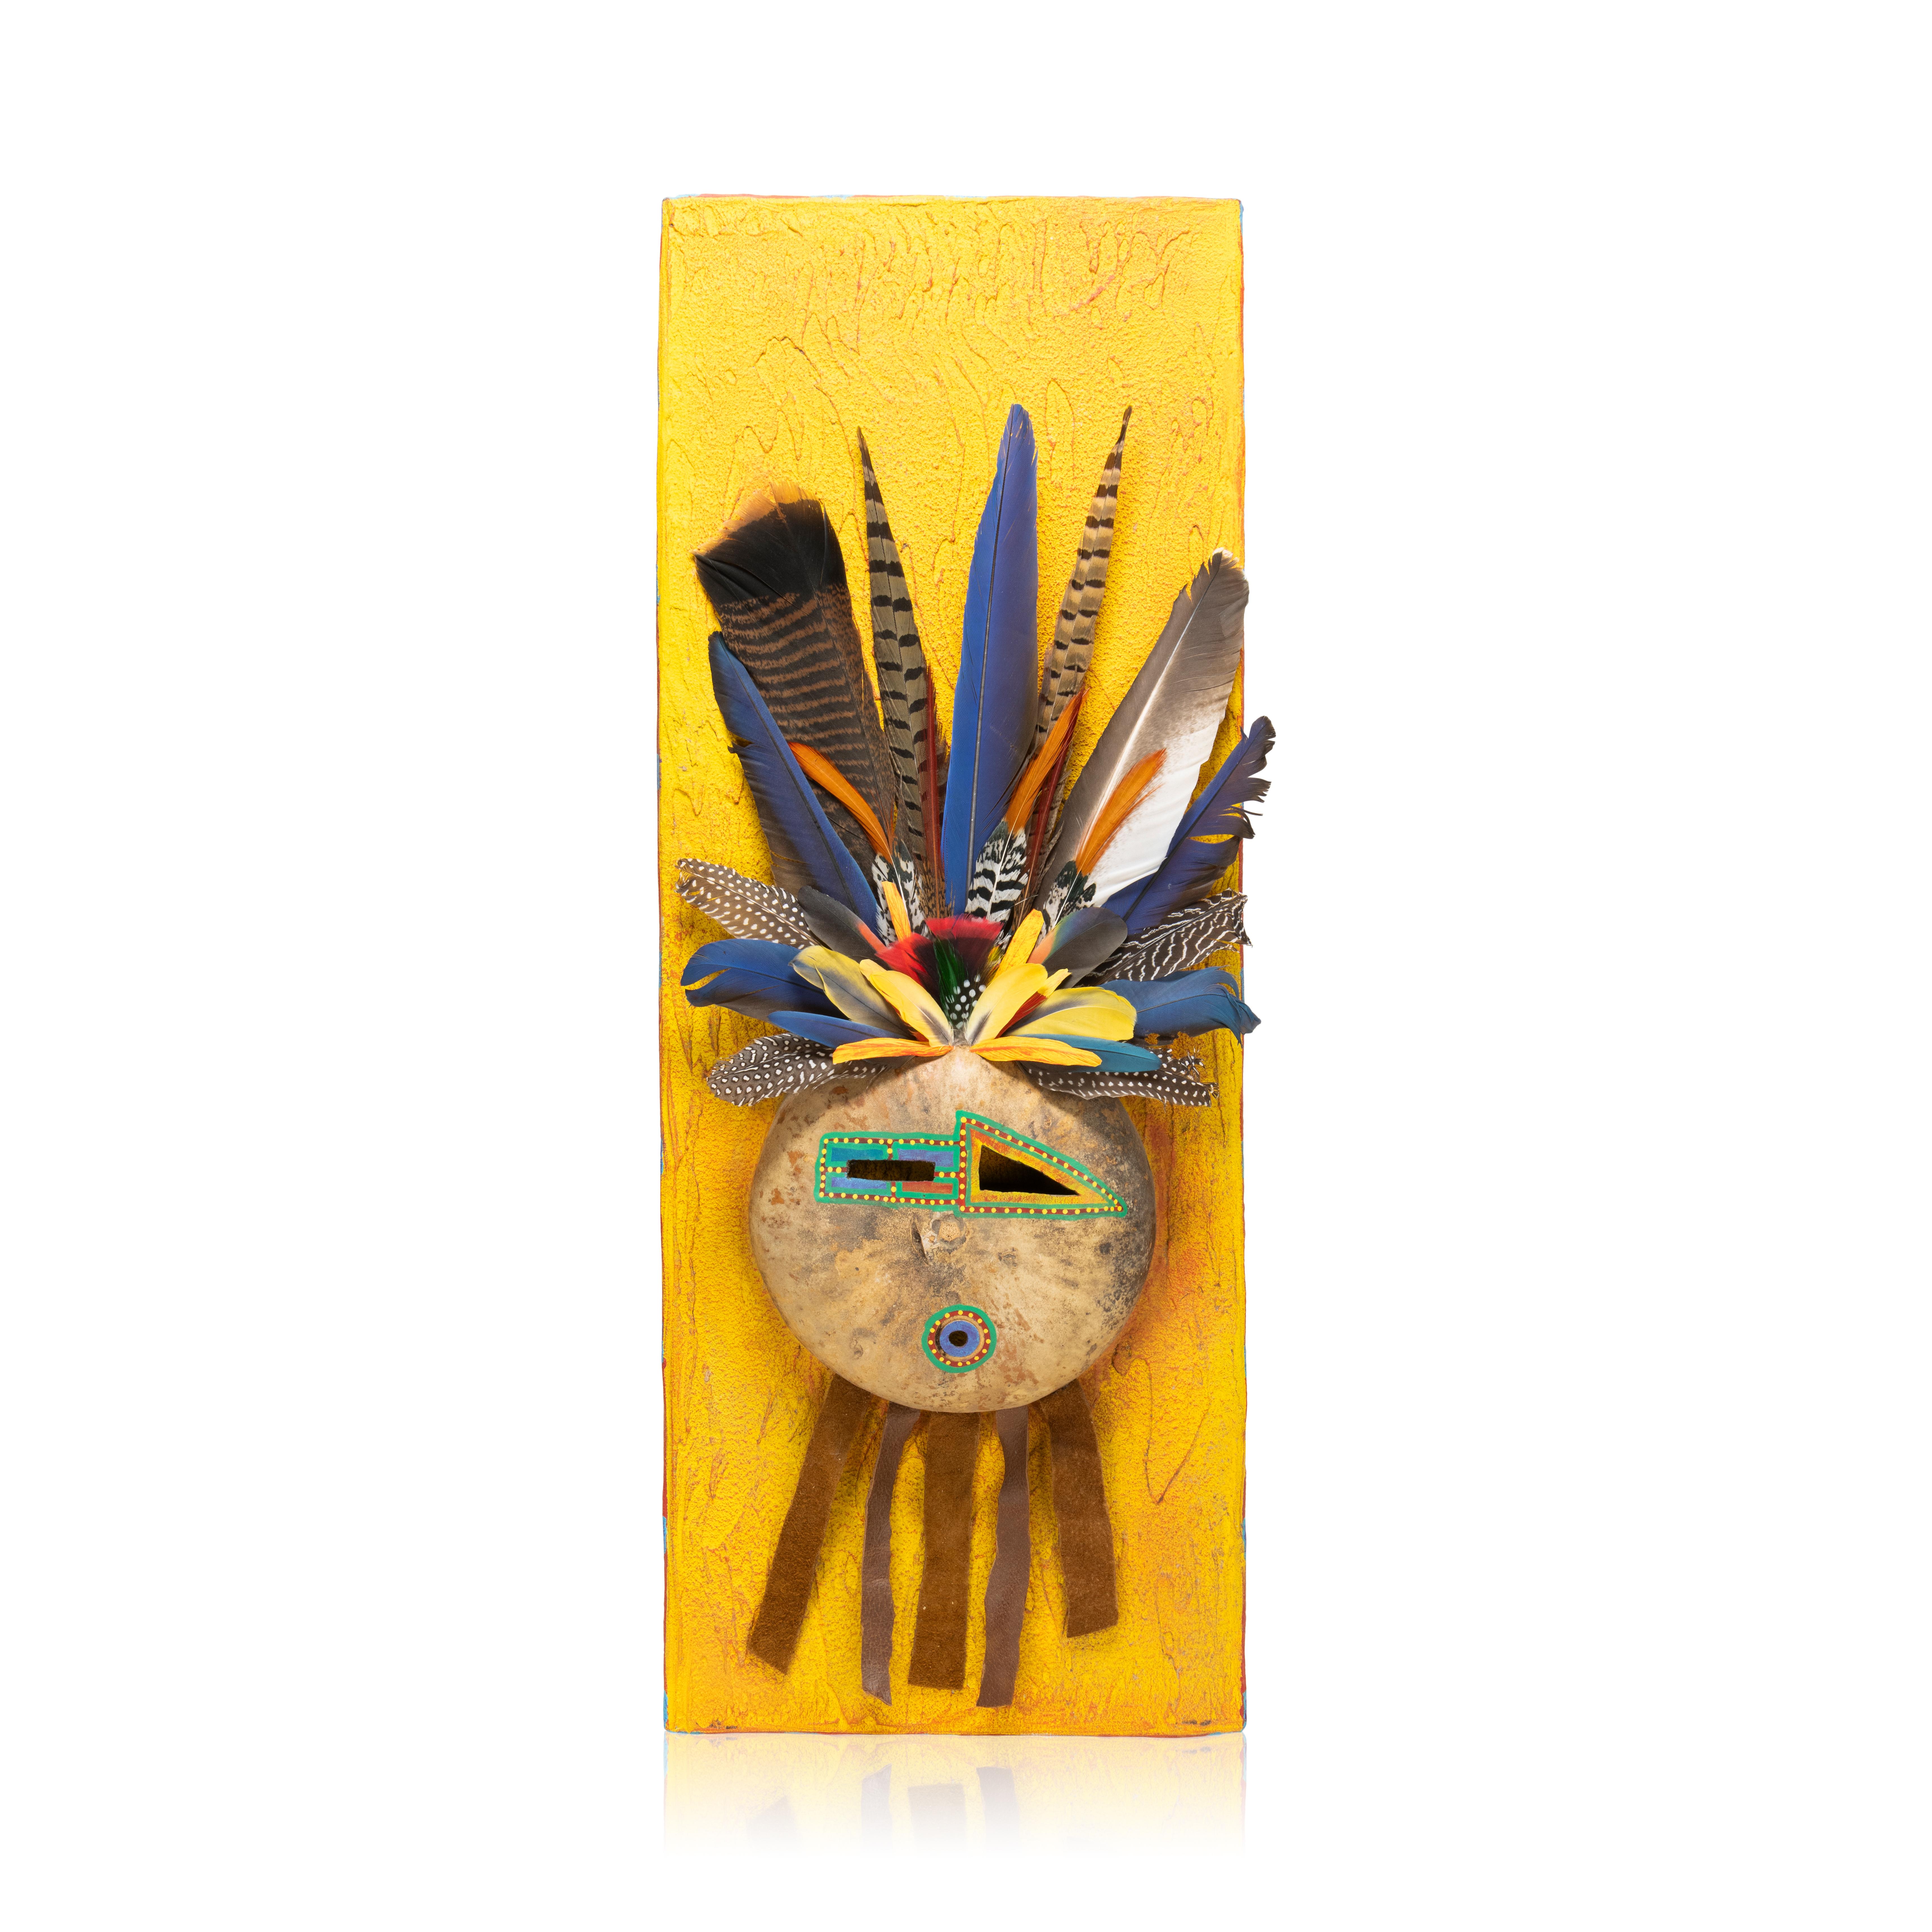 Sioux Shaman Masks with added gourds and feathers by Doug Fountain. Doug embodies the spirit and the power of the Great American Indian. A direct descendant of the legendary Chief Sitting Bull, Doug and his family are proud members of the Spirit